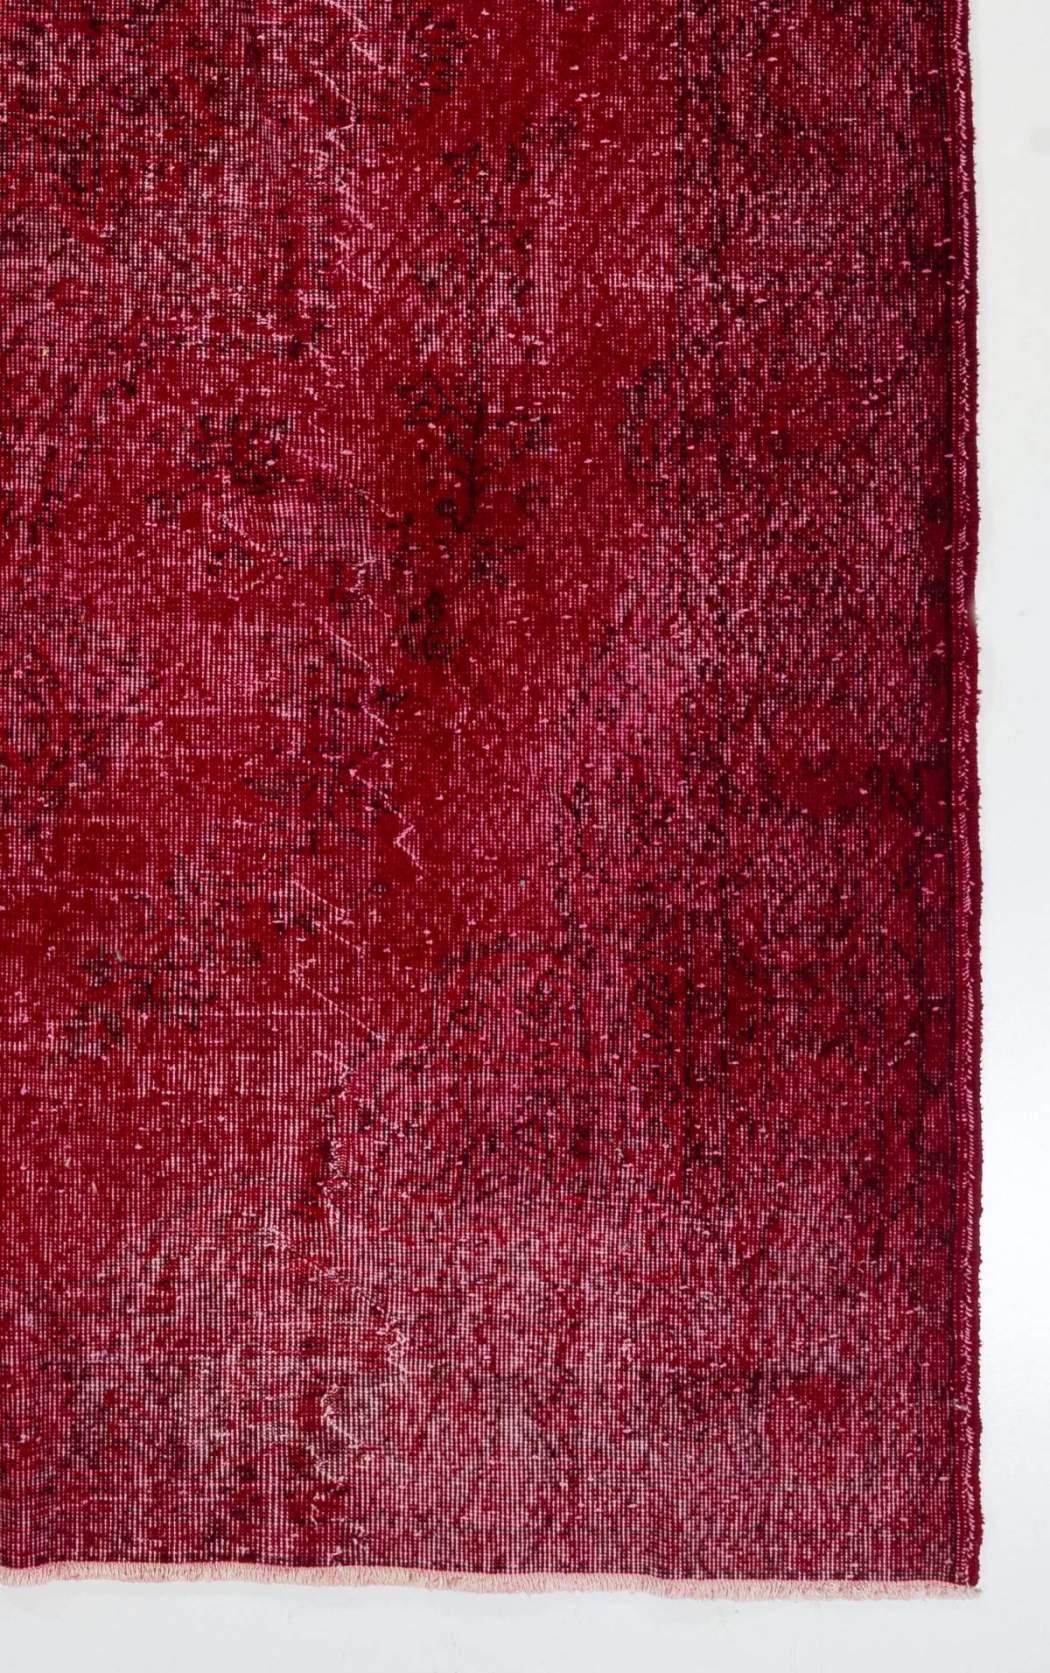 Cotton 6.2x10 Ft Vintage Handmade Turkish Rug Re-Dyed in Red Color for Modern Interiors For Sale